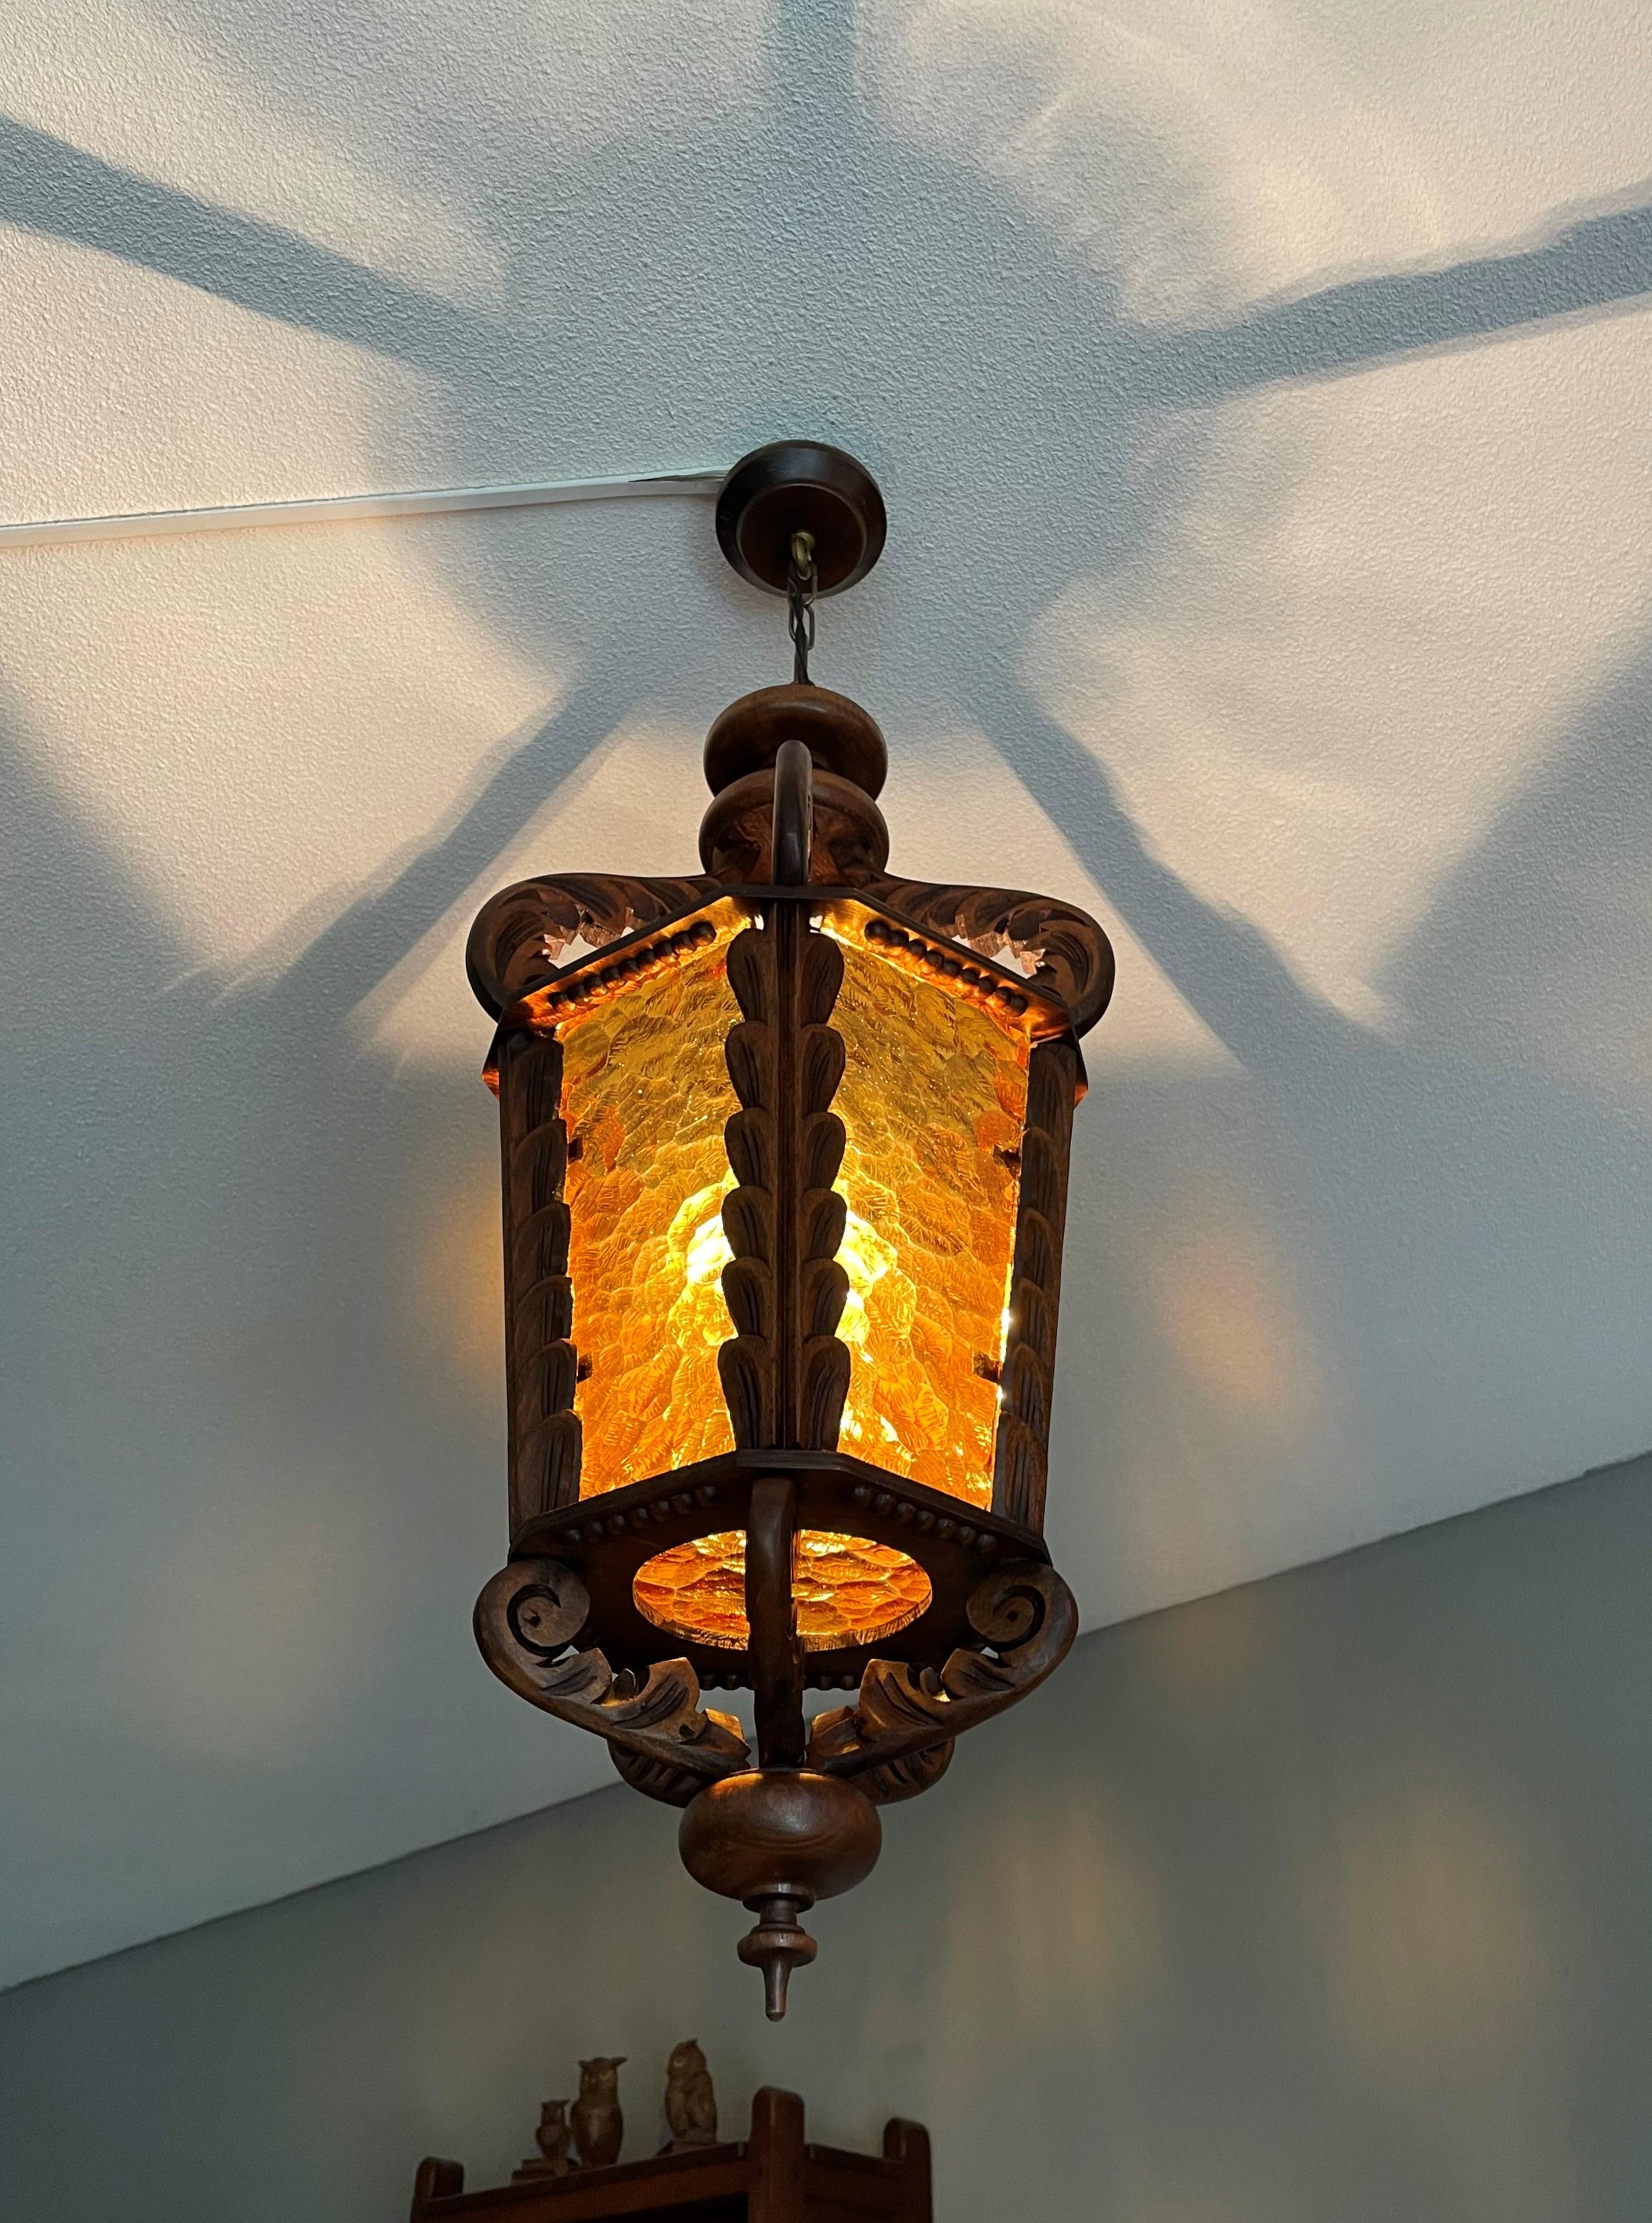 Stunning and all handcrafted hallway light fixture.

This great looking vintage lantern pendant is another one of our recent great finds and it is in superb condition. We have rewired it for safe and immediate usage in the US as well and we have